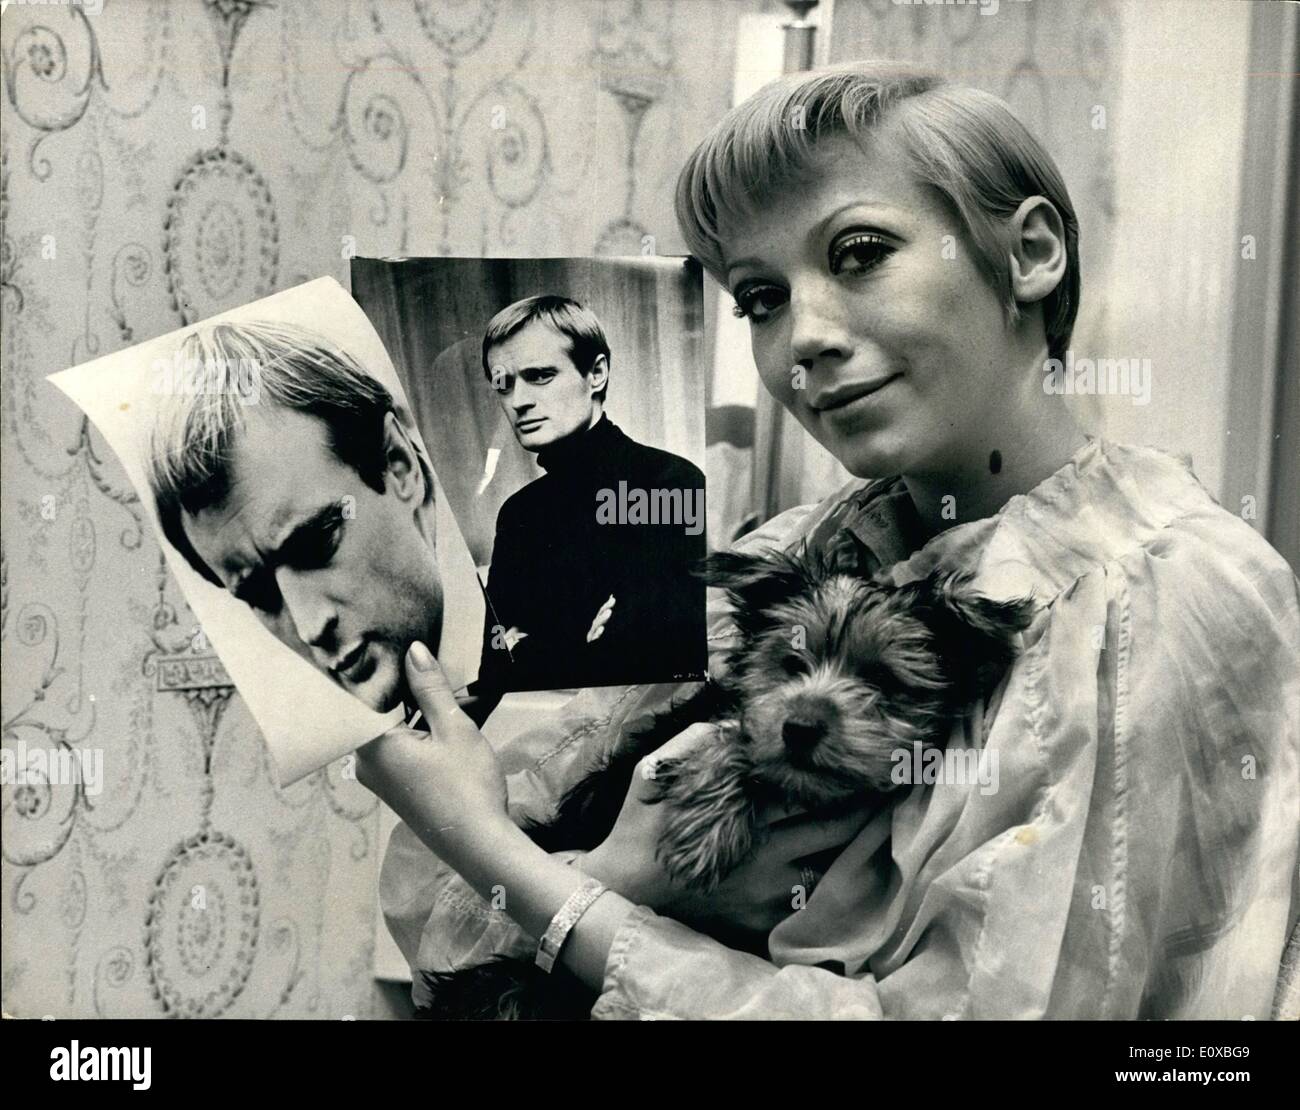 Mar. 03, 1966 - David McCallum Fans Adopt His Hairstyle- A group of girl fans of David McCallum (Illya Kuryakin - of The Man from U.N.C.L.E. - this morning went along to the ALEXE Mayfair Hairdressing Salon, to have their hair styled in the same way as his. Keystone Photo Shows: Sue Burgess, 22, from Wallasey, Cheshire, seen with her pet dog, ''Ethel'', after ahe had her hair styled by ALEXE this morning. She is holding two pictures of David McCallum. H/Keystone Stock Photo